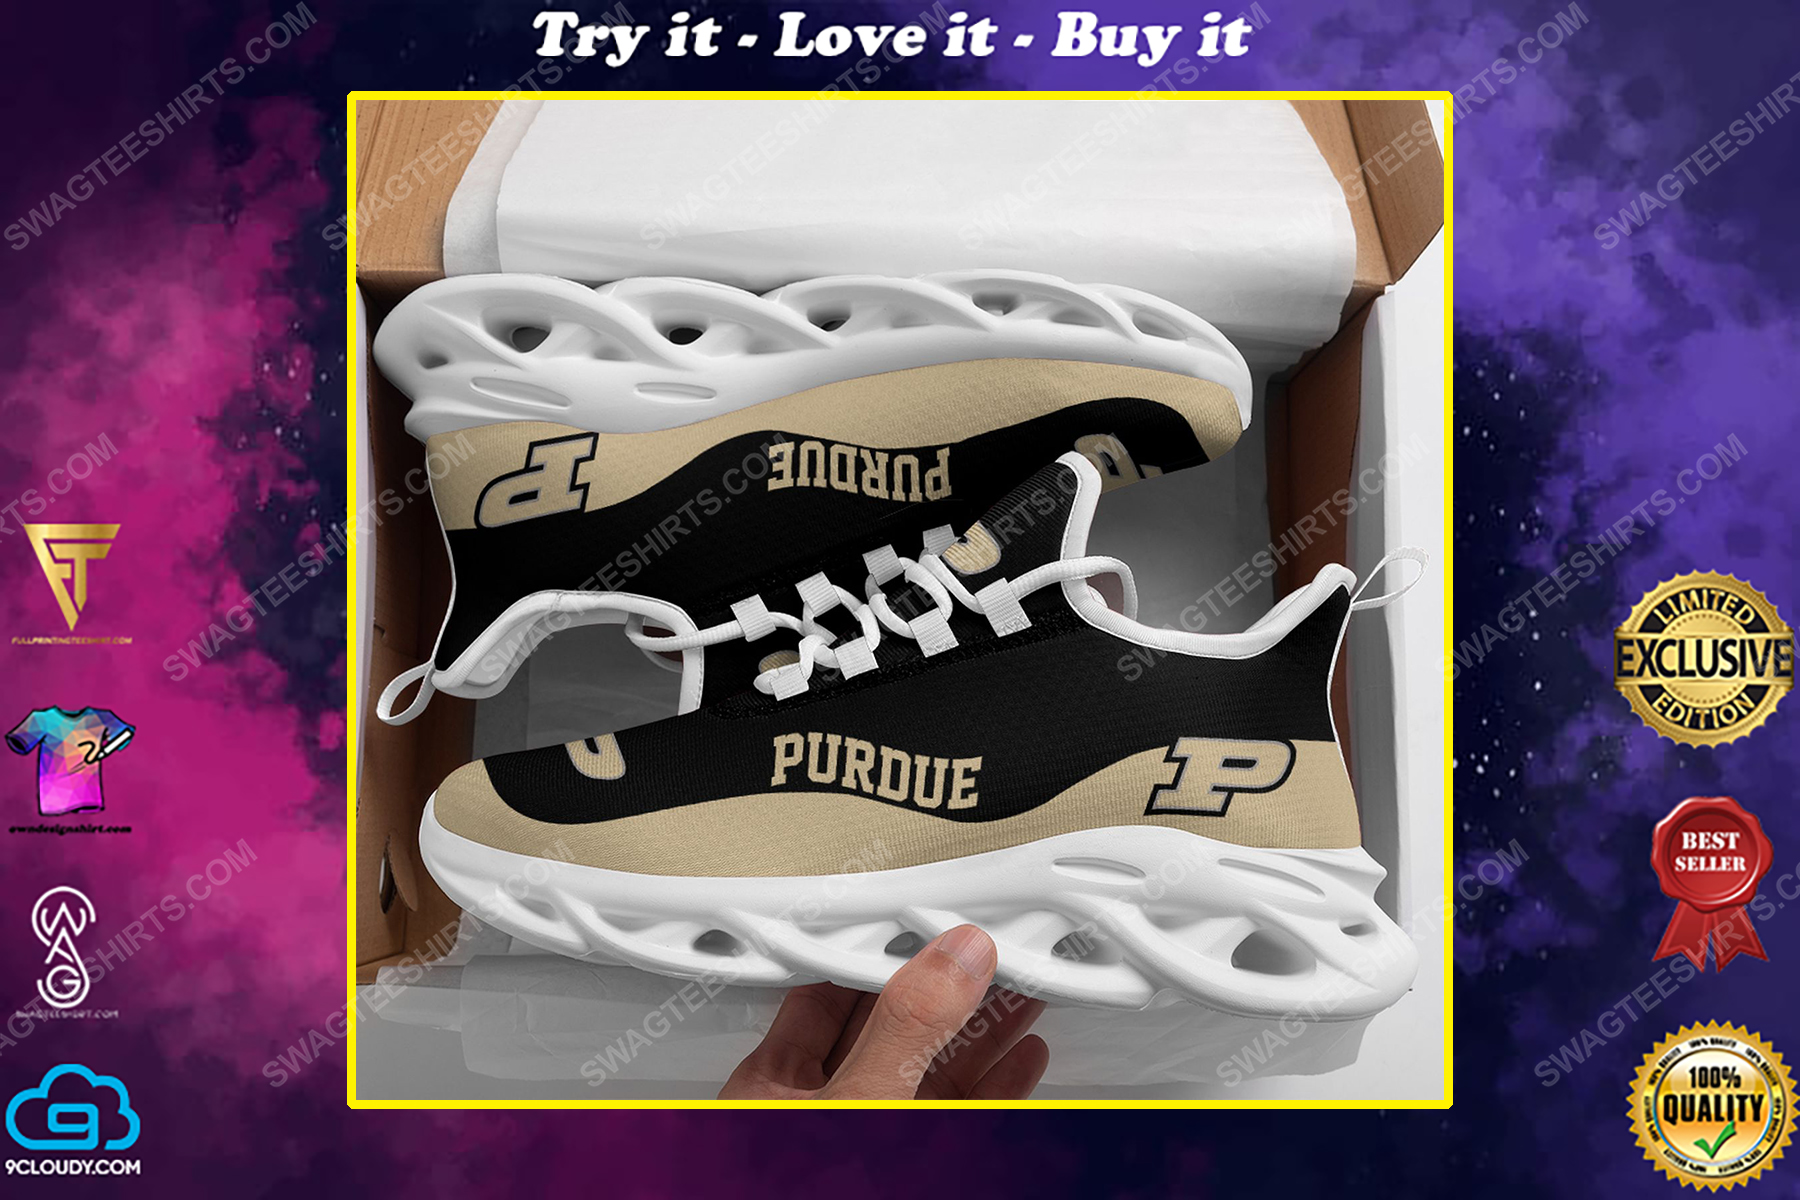 The purdue boilermakers football team max soul shoes